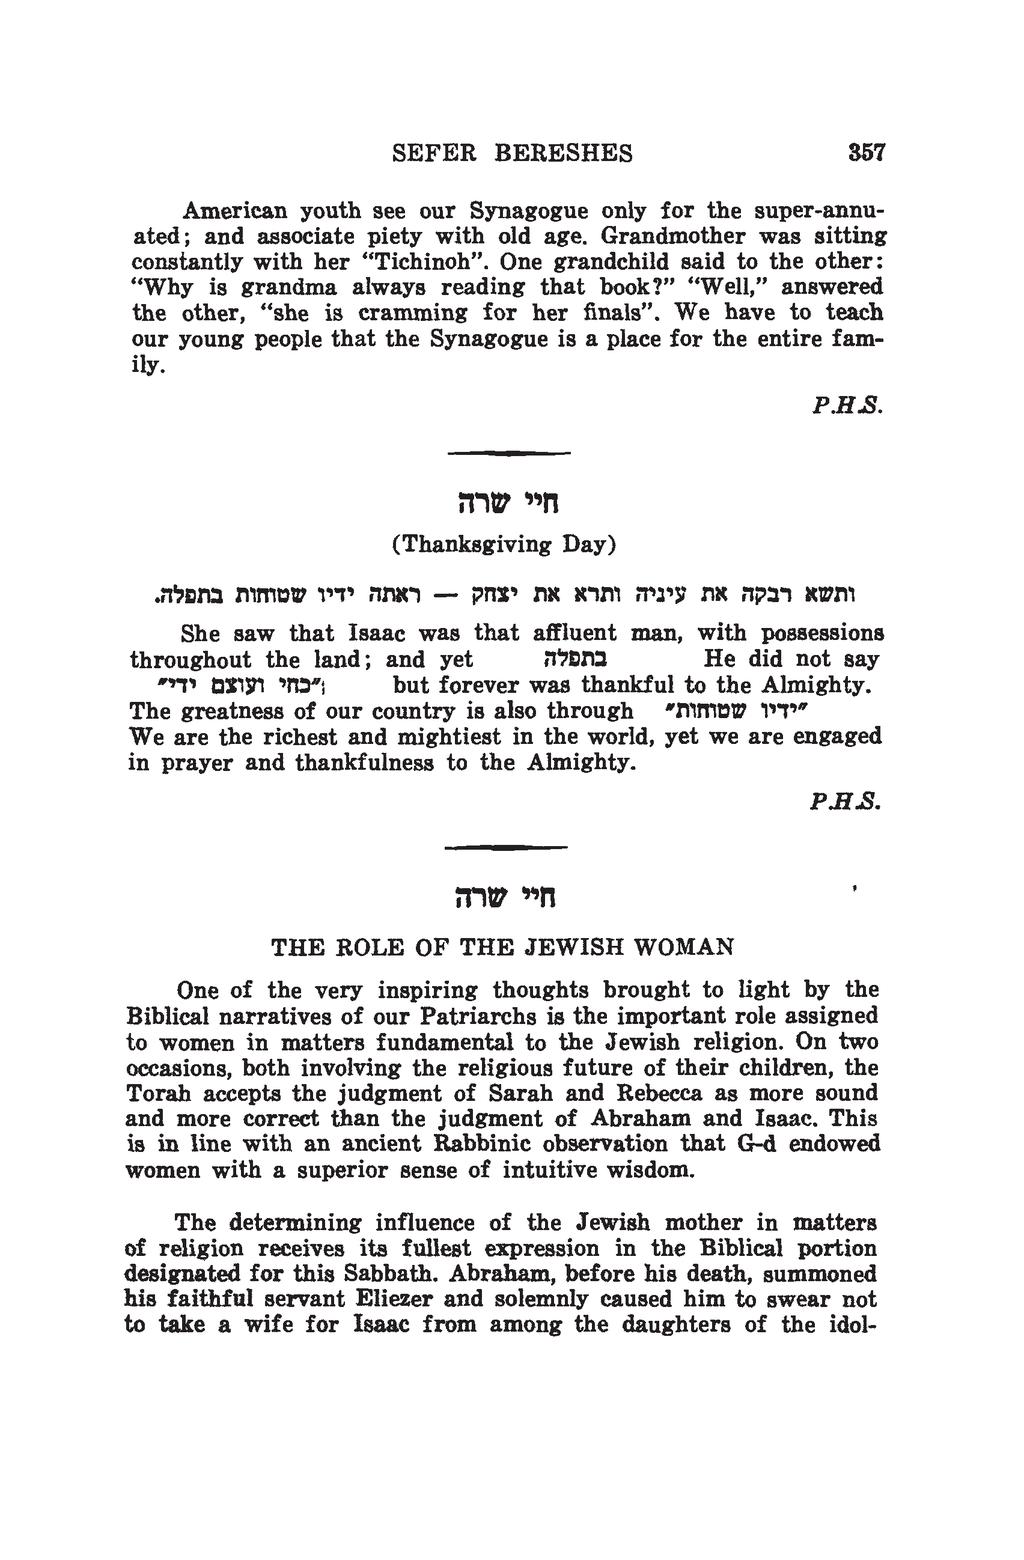 SEFER BERESHES S57 American youth see our Synagogue only for the super-annuated; and associate piety with old age. Grandmother was sitting constantly with her Tichinoh.